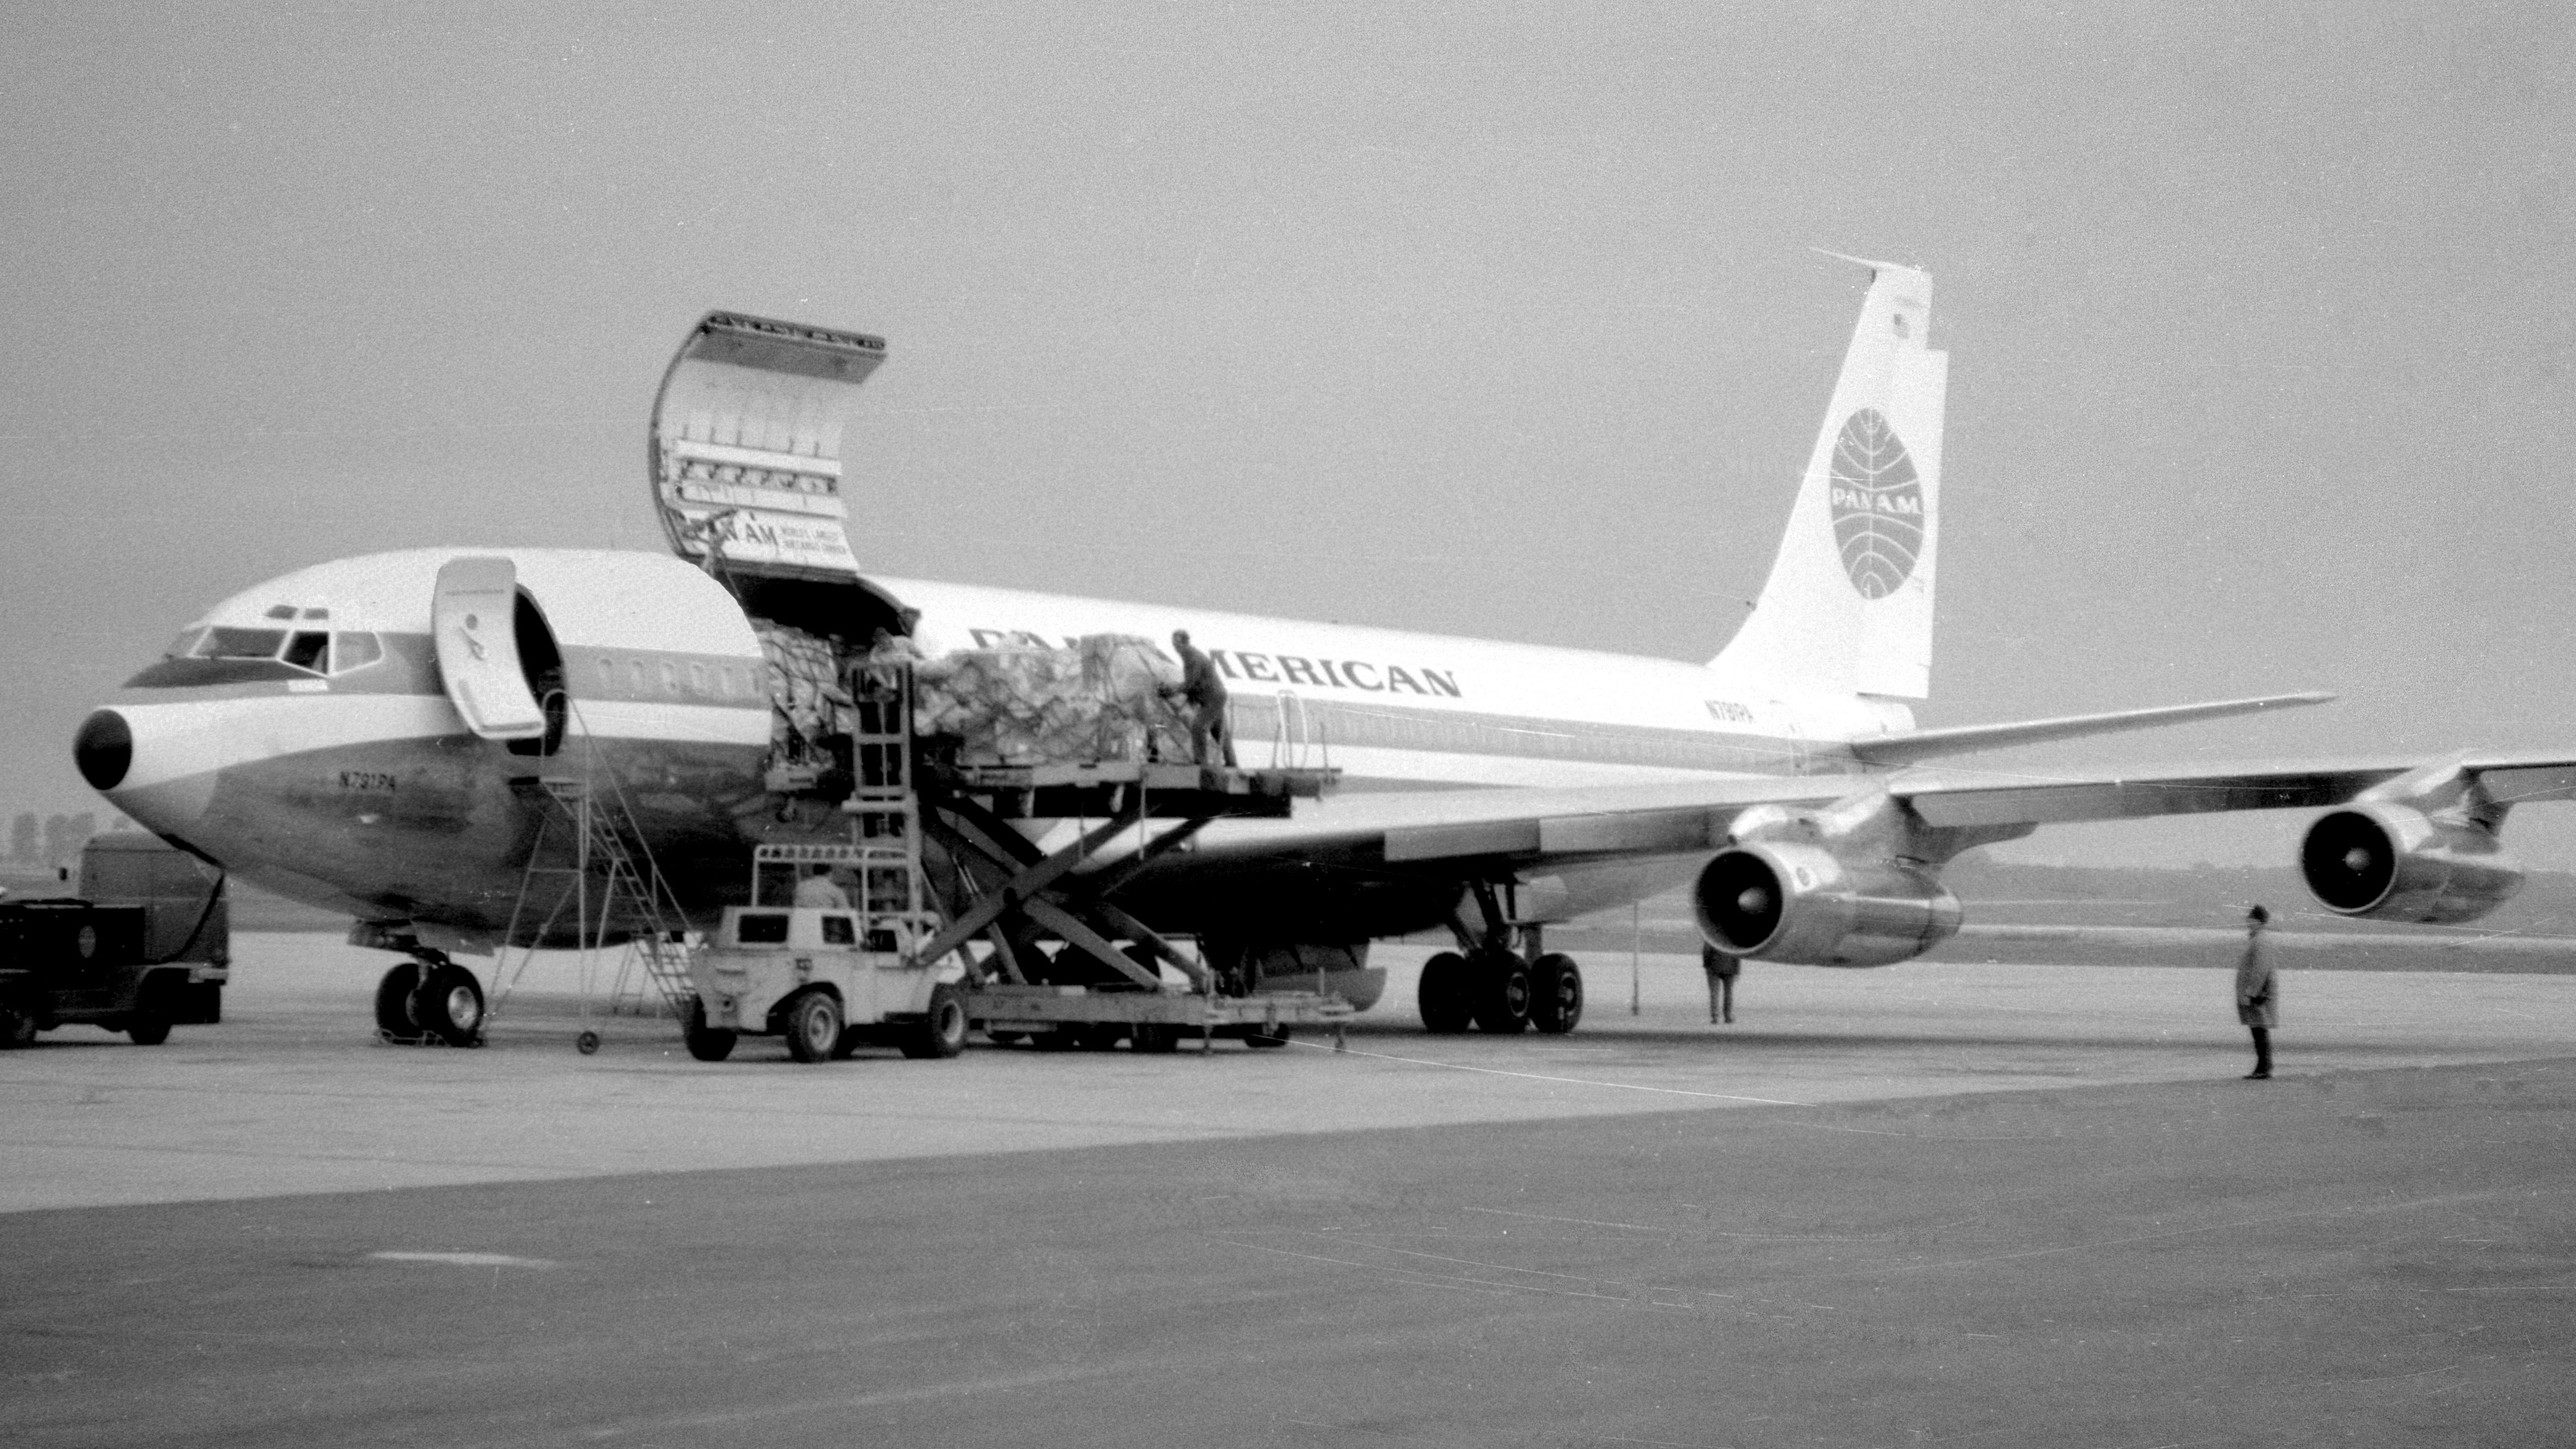 A Pan American Boeing 707 being loaded on an airport apron.